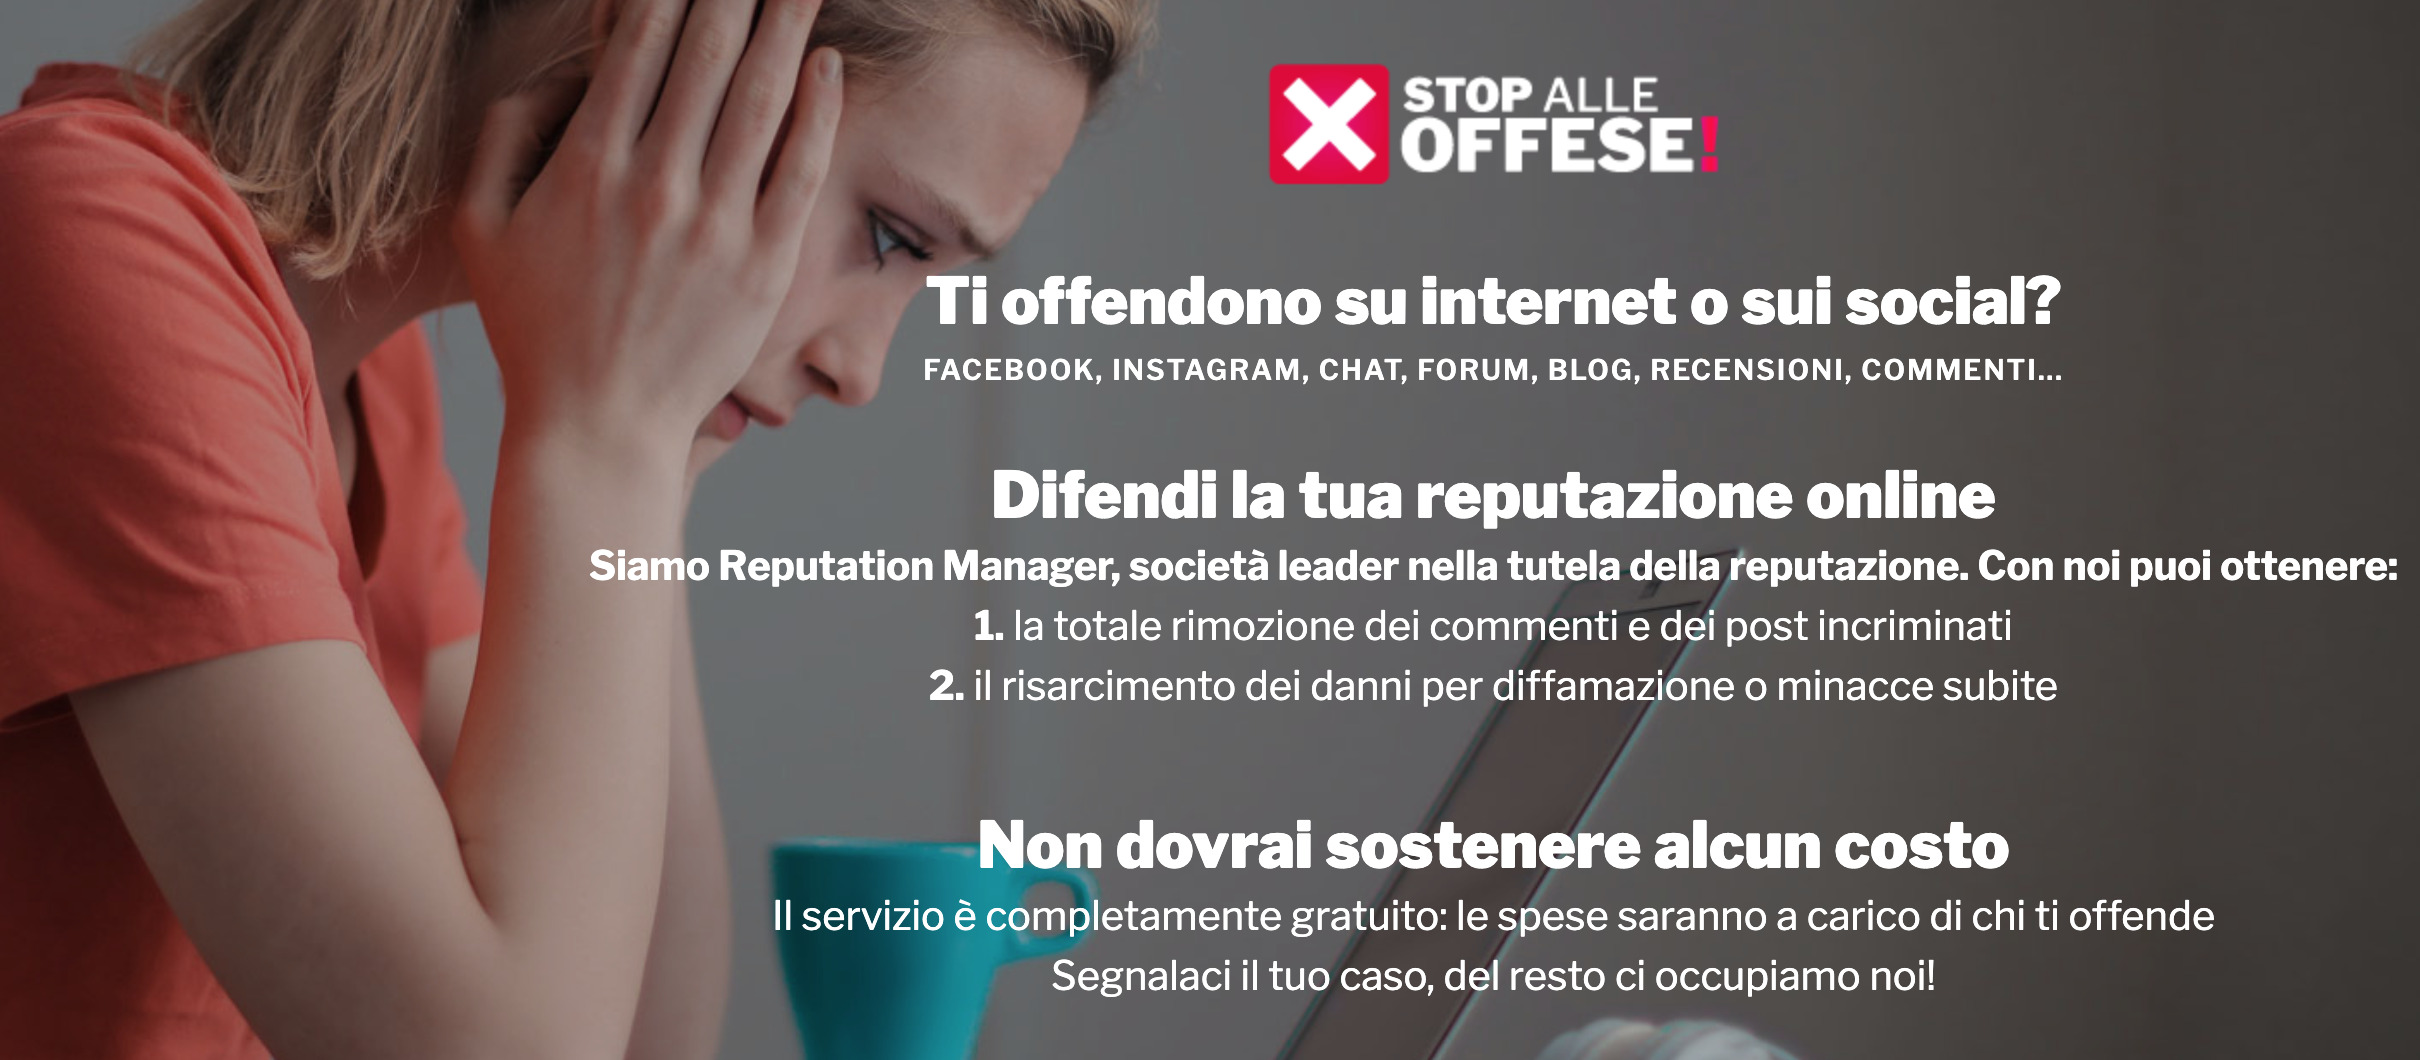 stop offese